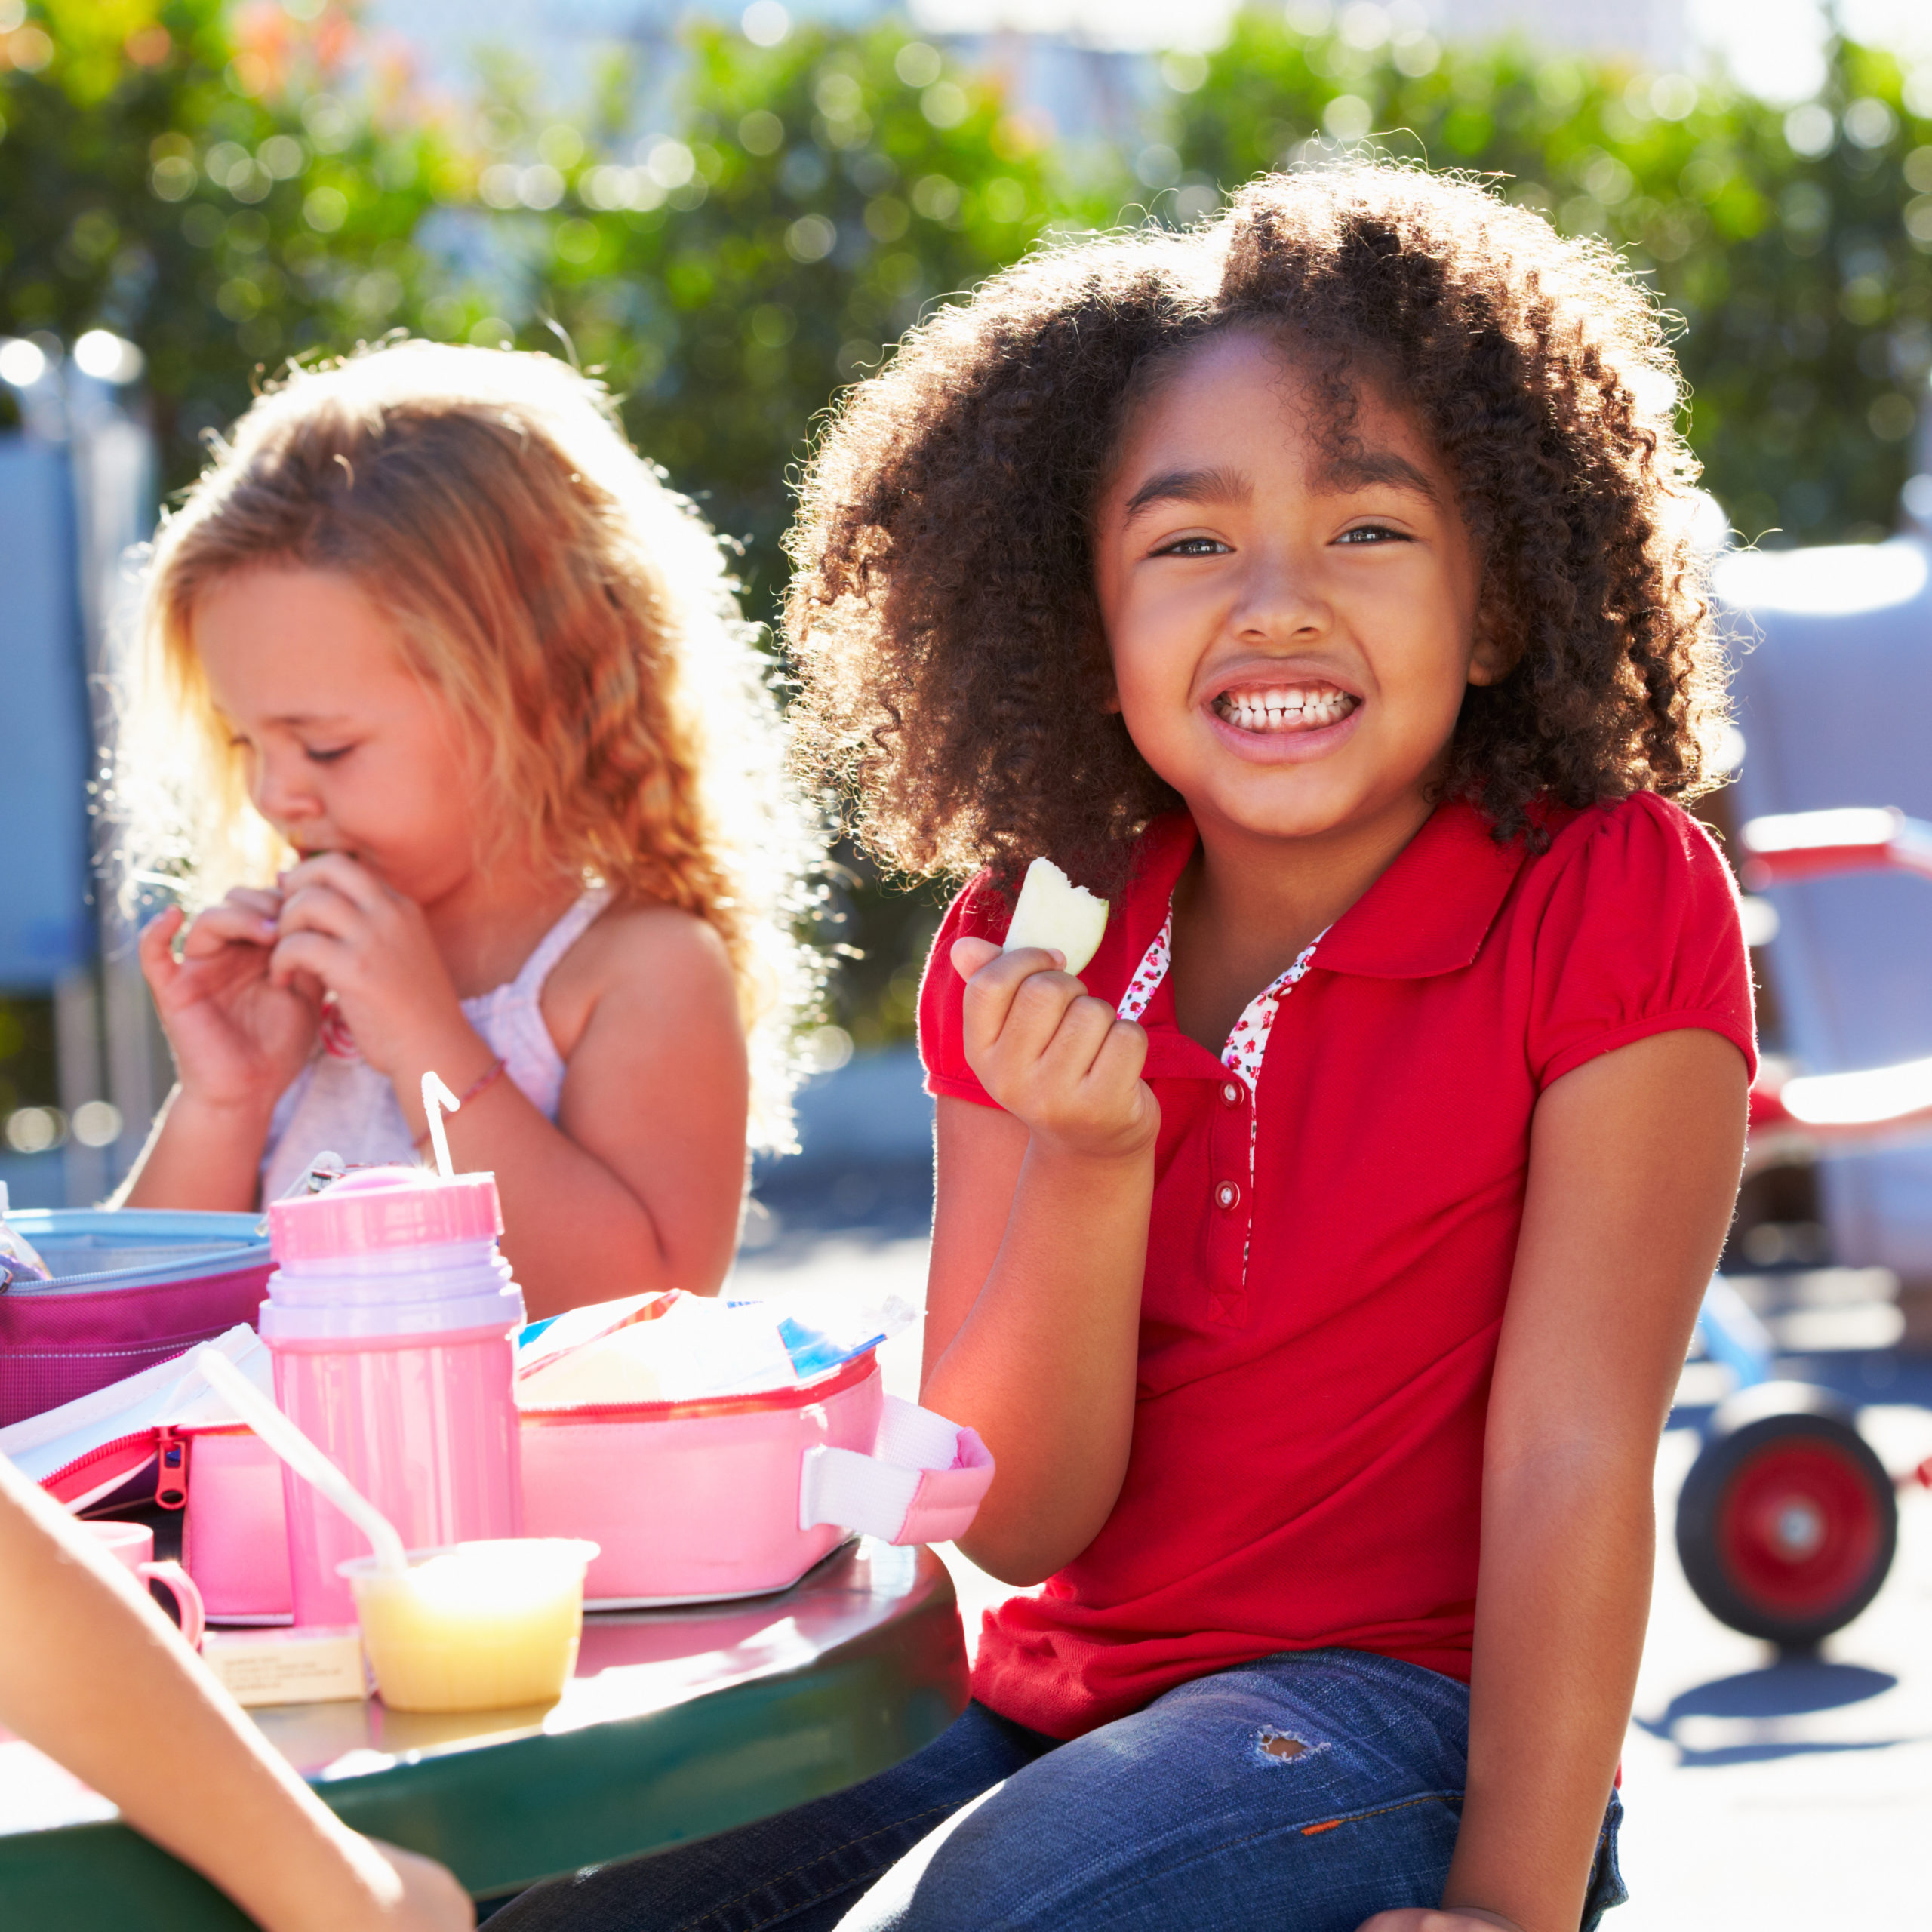 5 tips for packing healthy school lunches